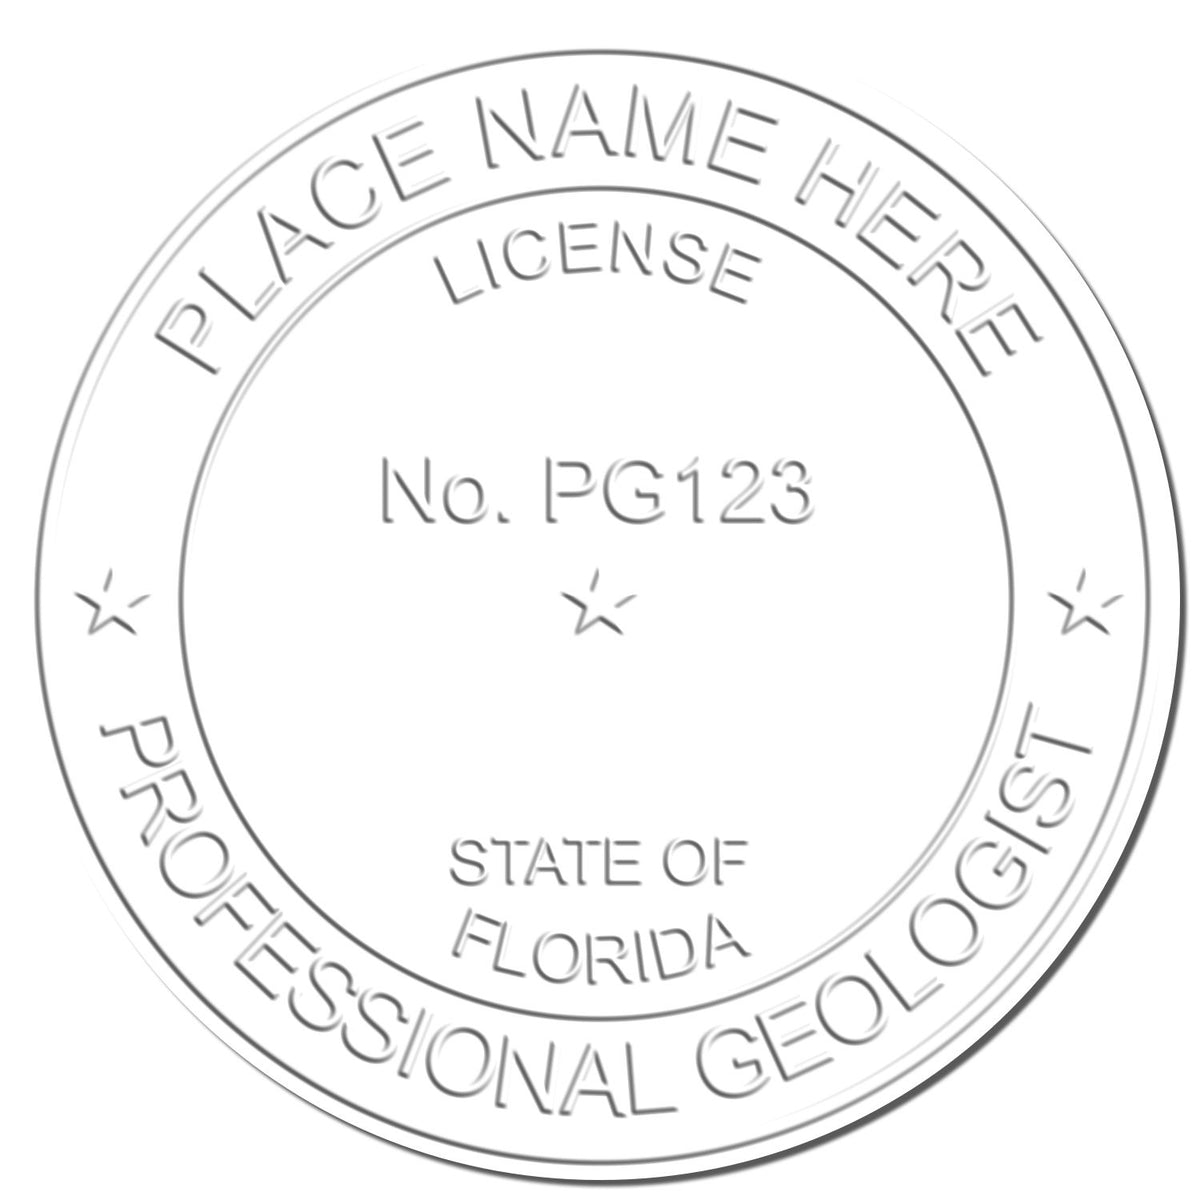 A photograph of the State of Florida Extended Long Reach Geologist Seal stamp impression reveals a vivid, professional image of the on paper.